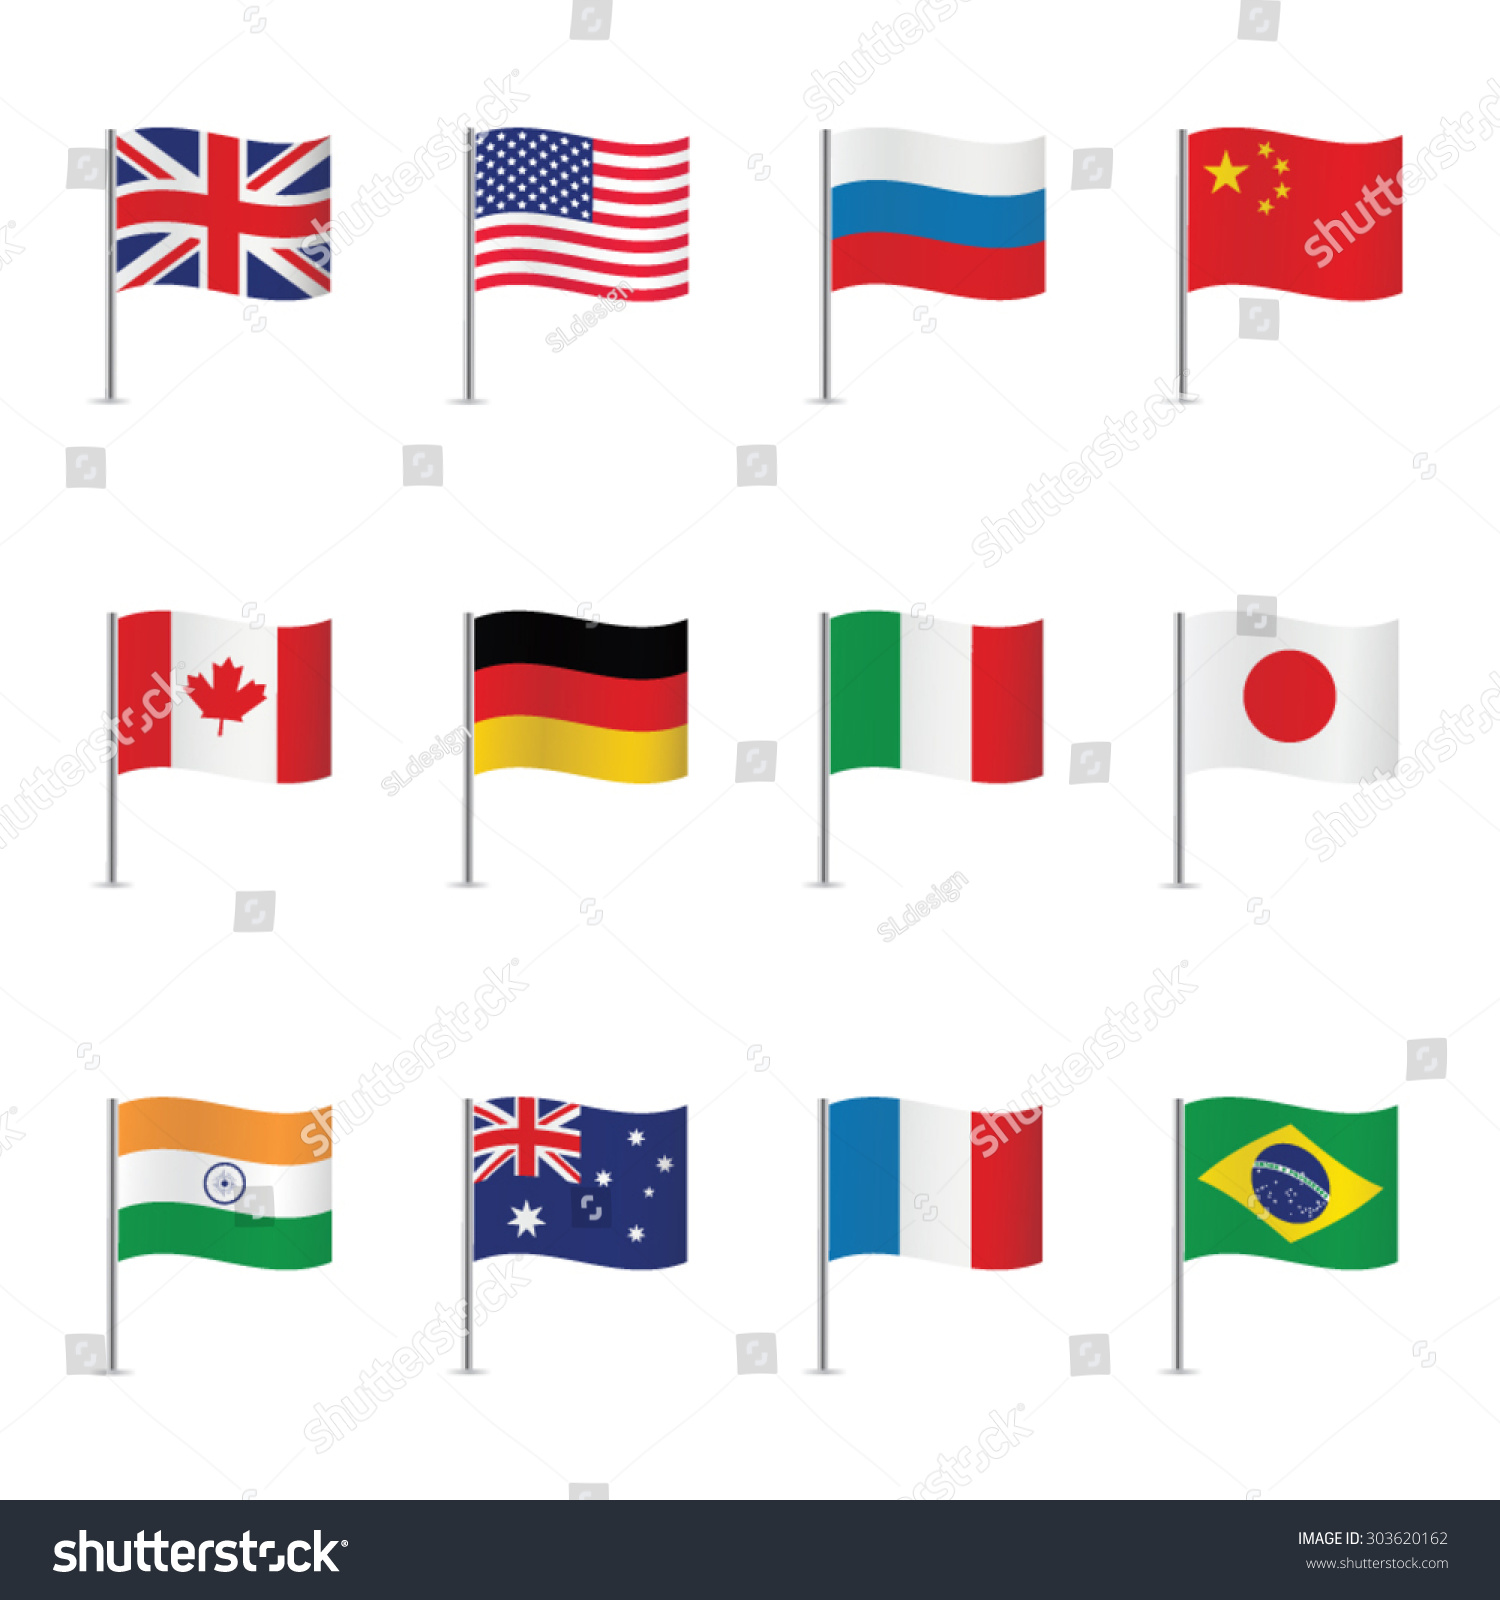 SVG of World flags on white background, vector set. svg